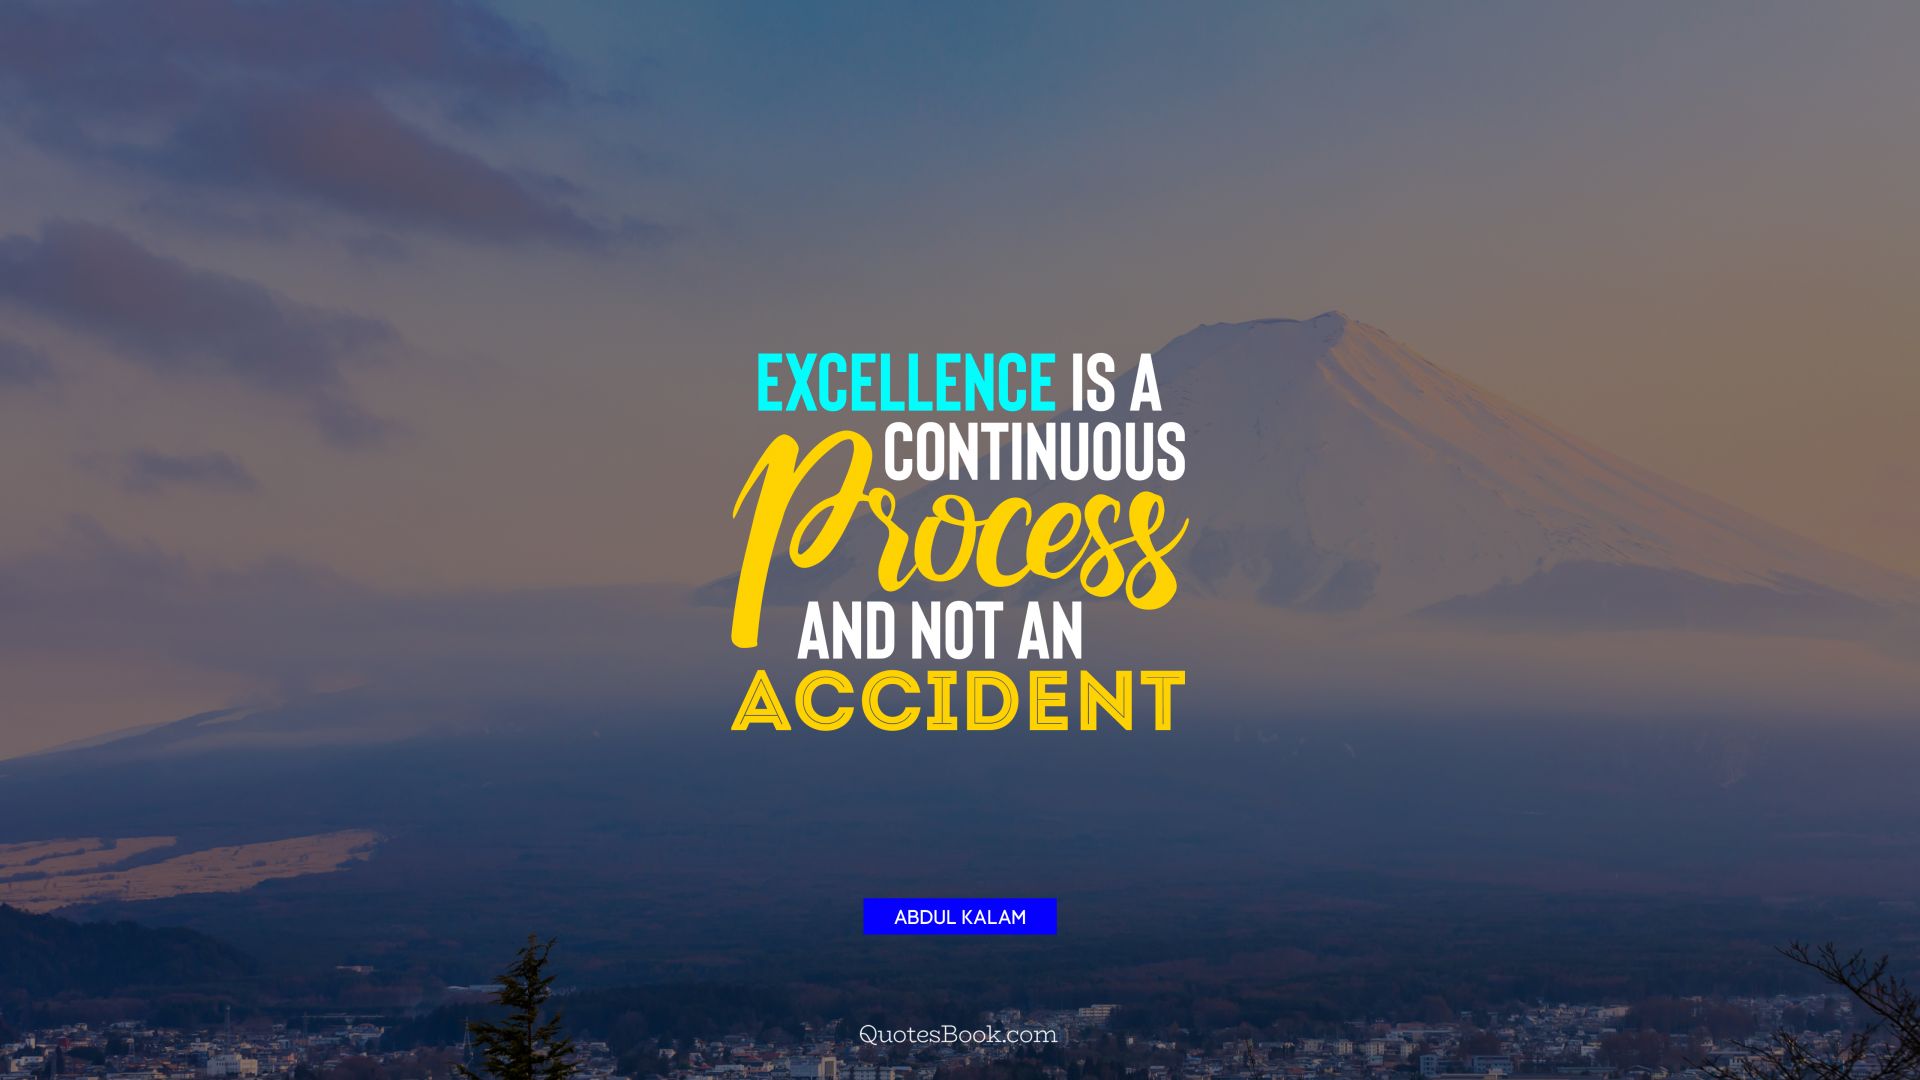 Excellence is a continuous process and not an accident. - Quote by Abdul Kalam